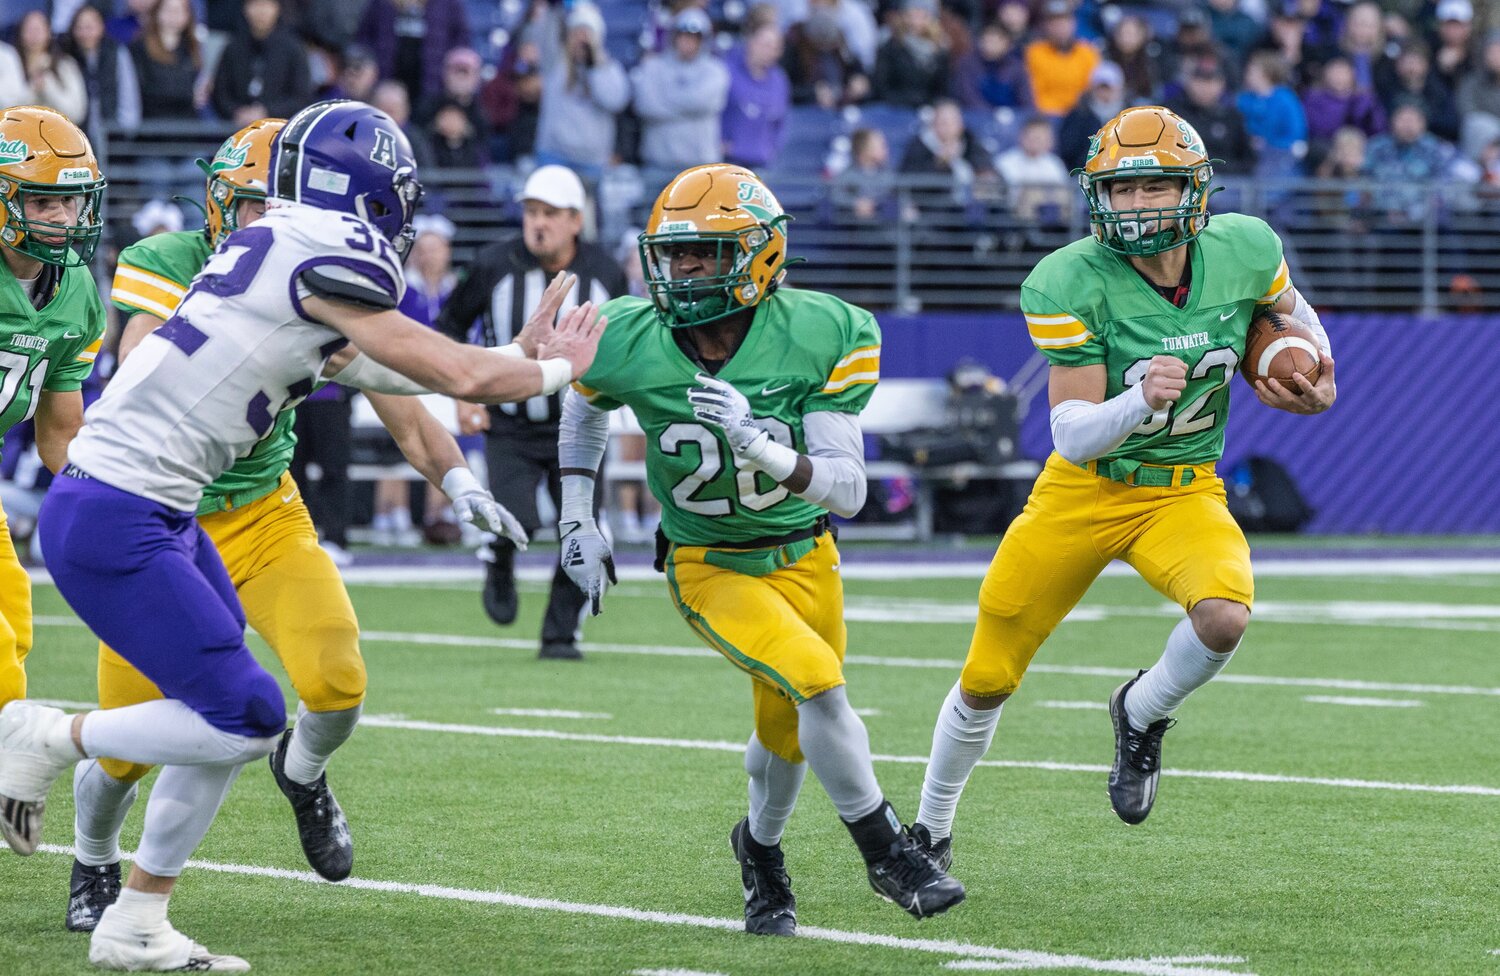 Peyton Davis runs behind Jaylin Nixon during the first half of Tumwater's loss to Anacortes in the 2A state championship game on Dec. 2 at Husky Stadium in Seattle.